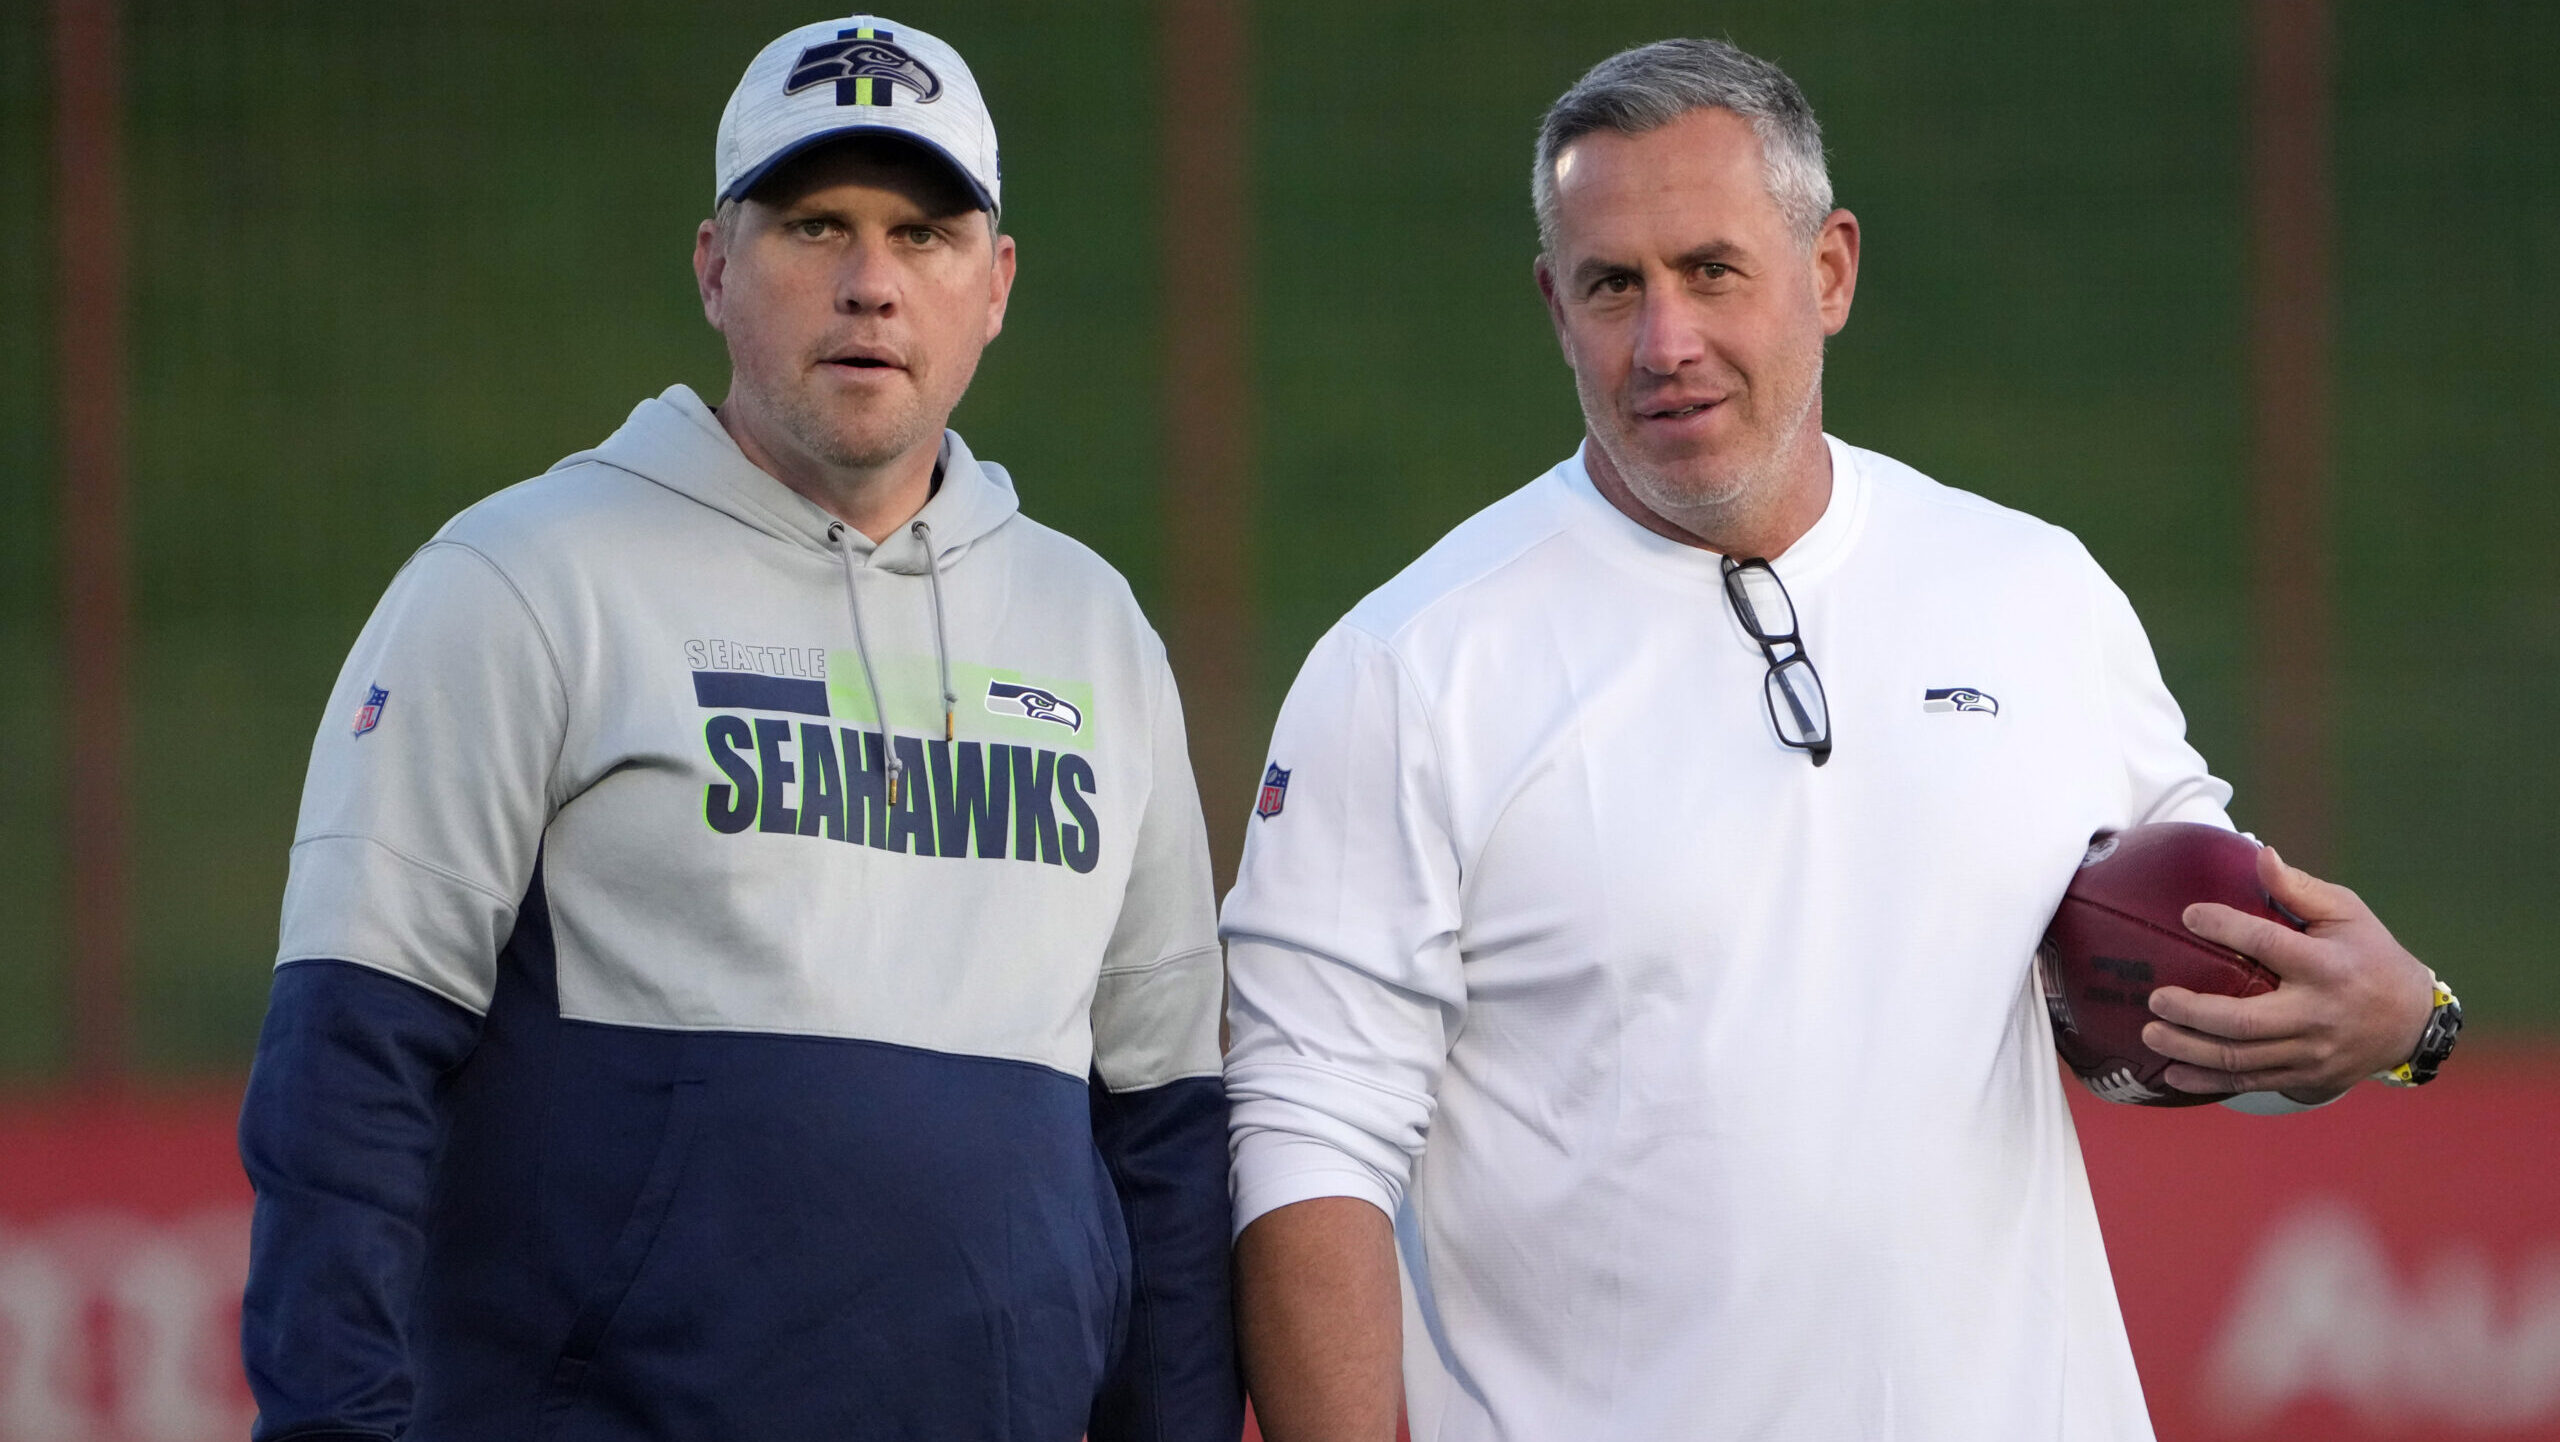 Shane Waldron stands on field with Seahawks tight end coach